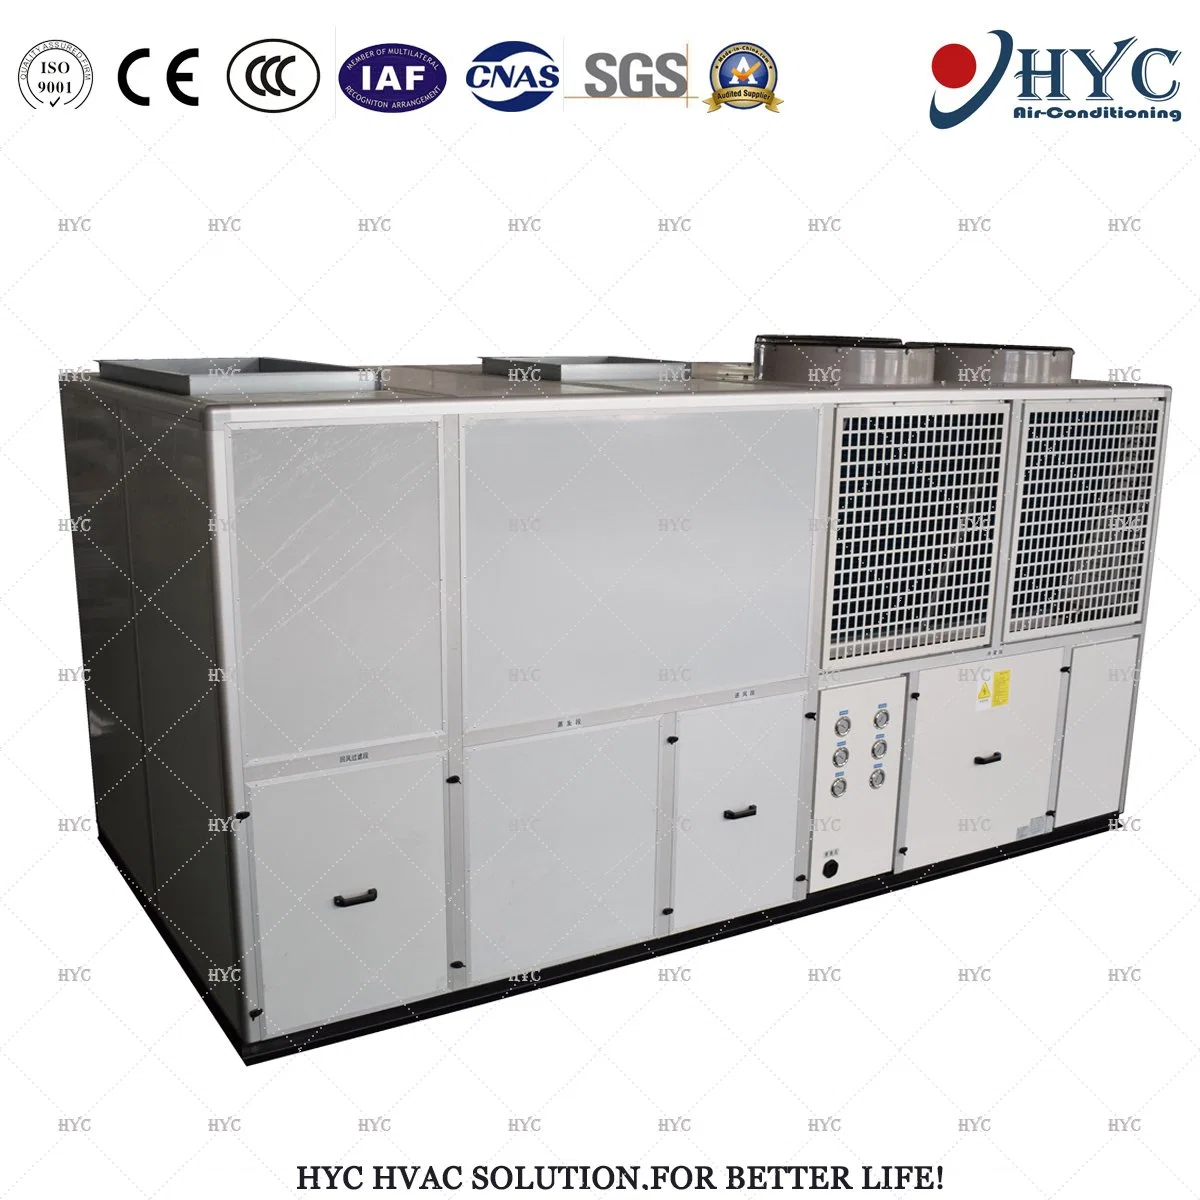 Gas Burner Rooftop Packaged Unit Air Conditioner